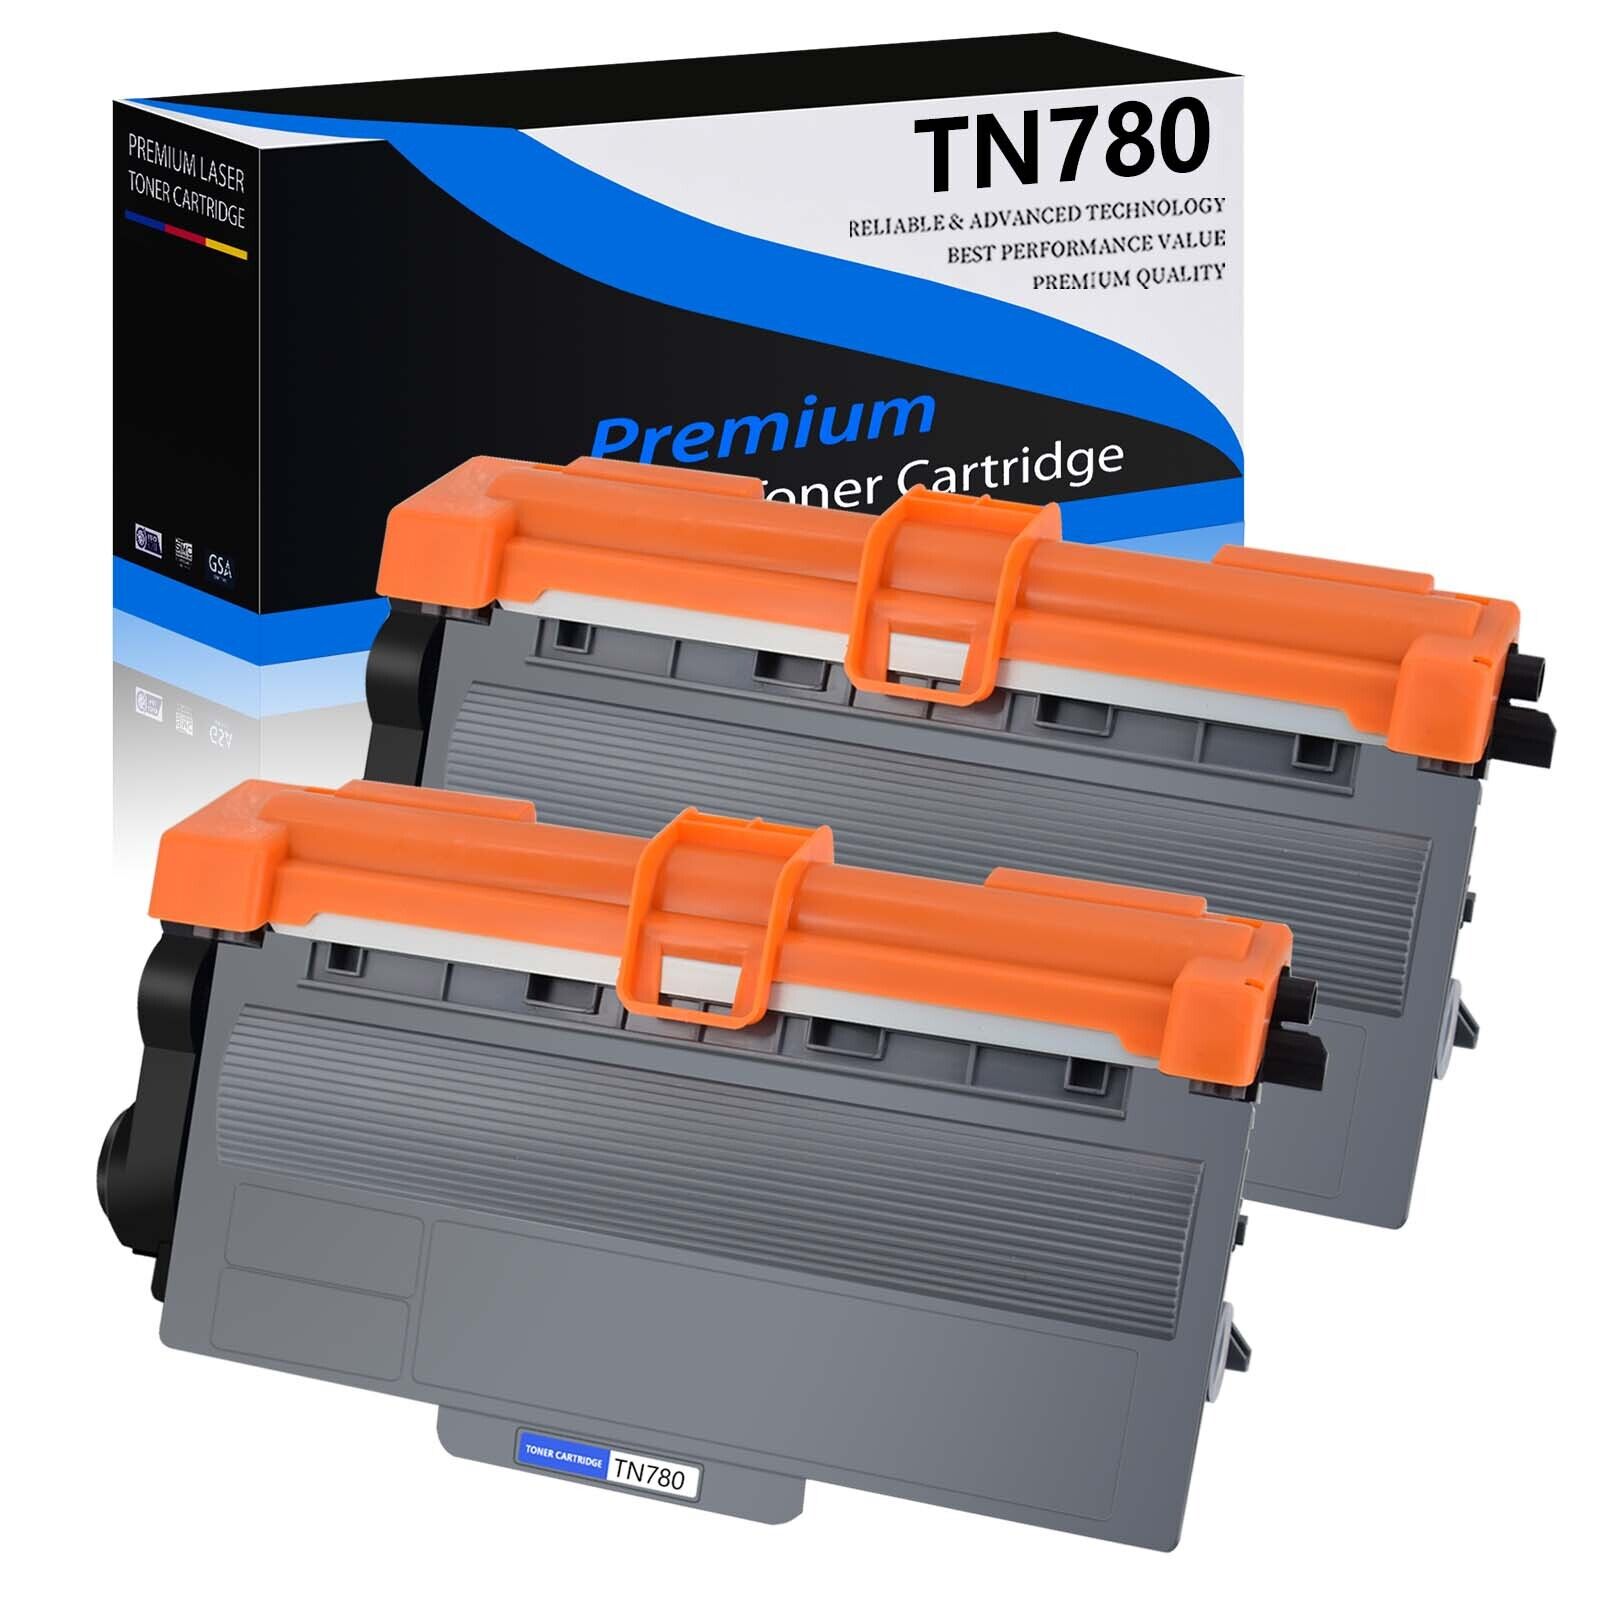 2 Pack - TN780 TN-780 Toner for Brother MFC-8950DW MFC-8950DWT MFC-8910DW